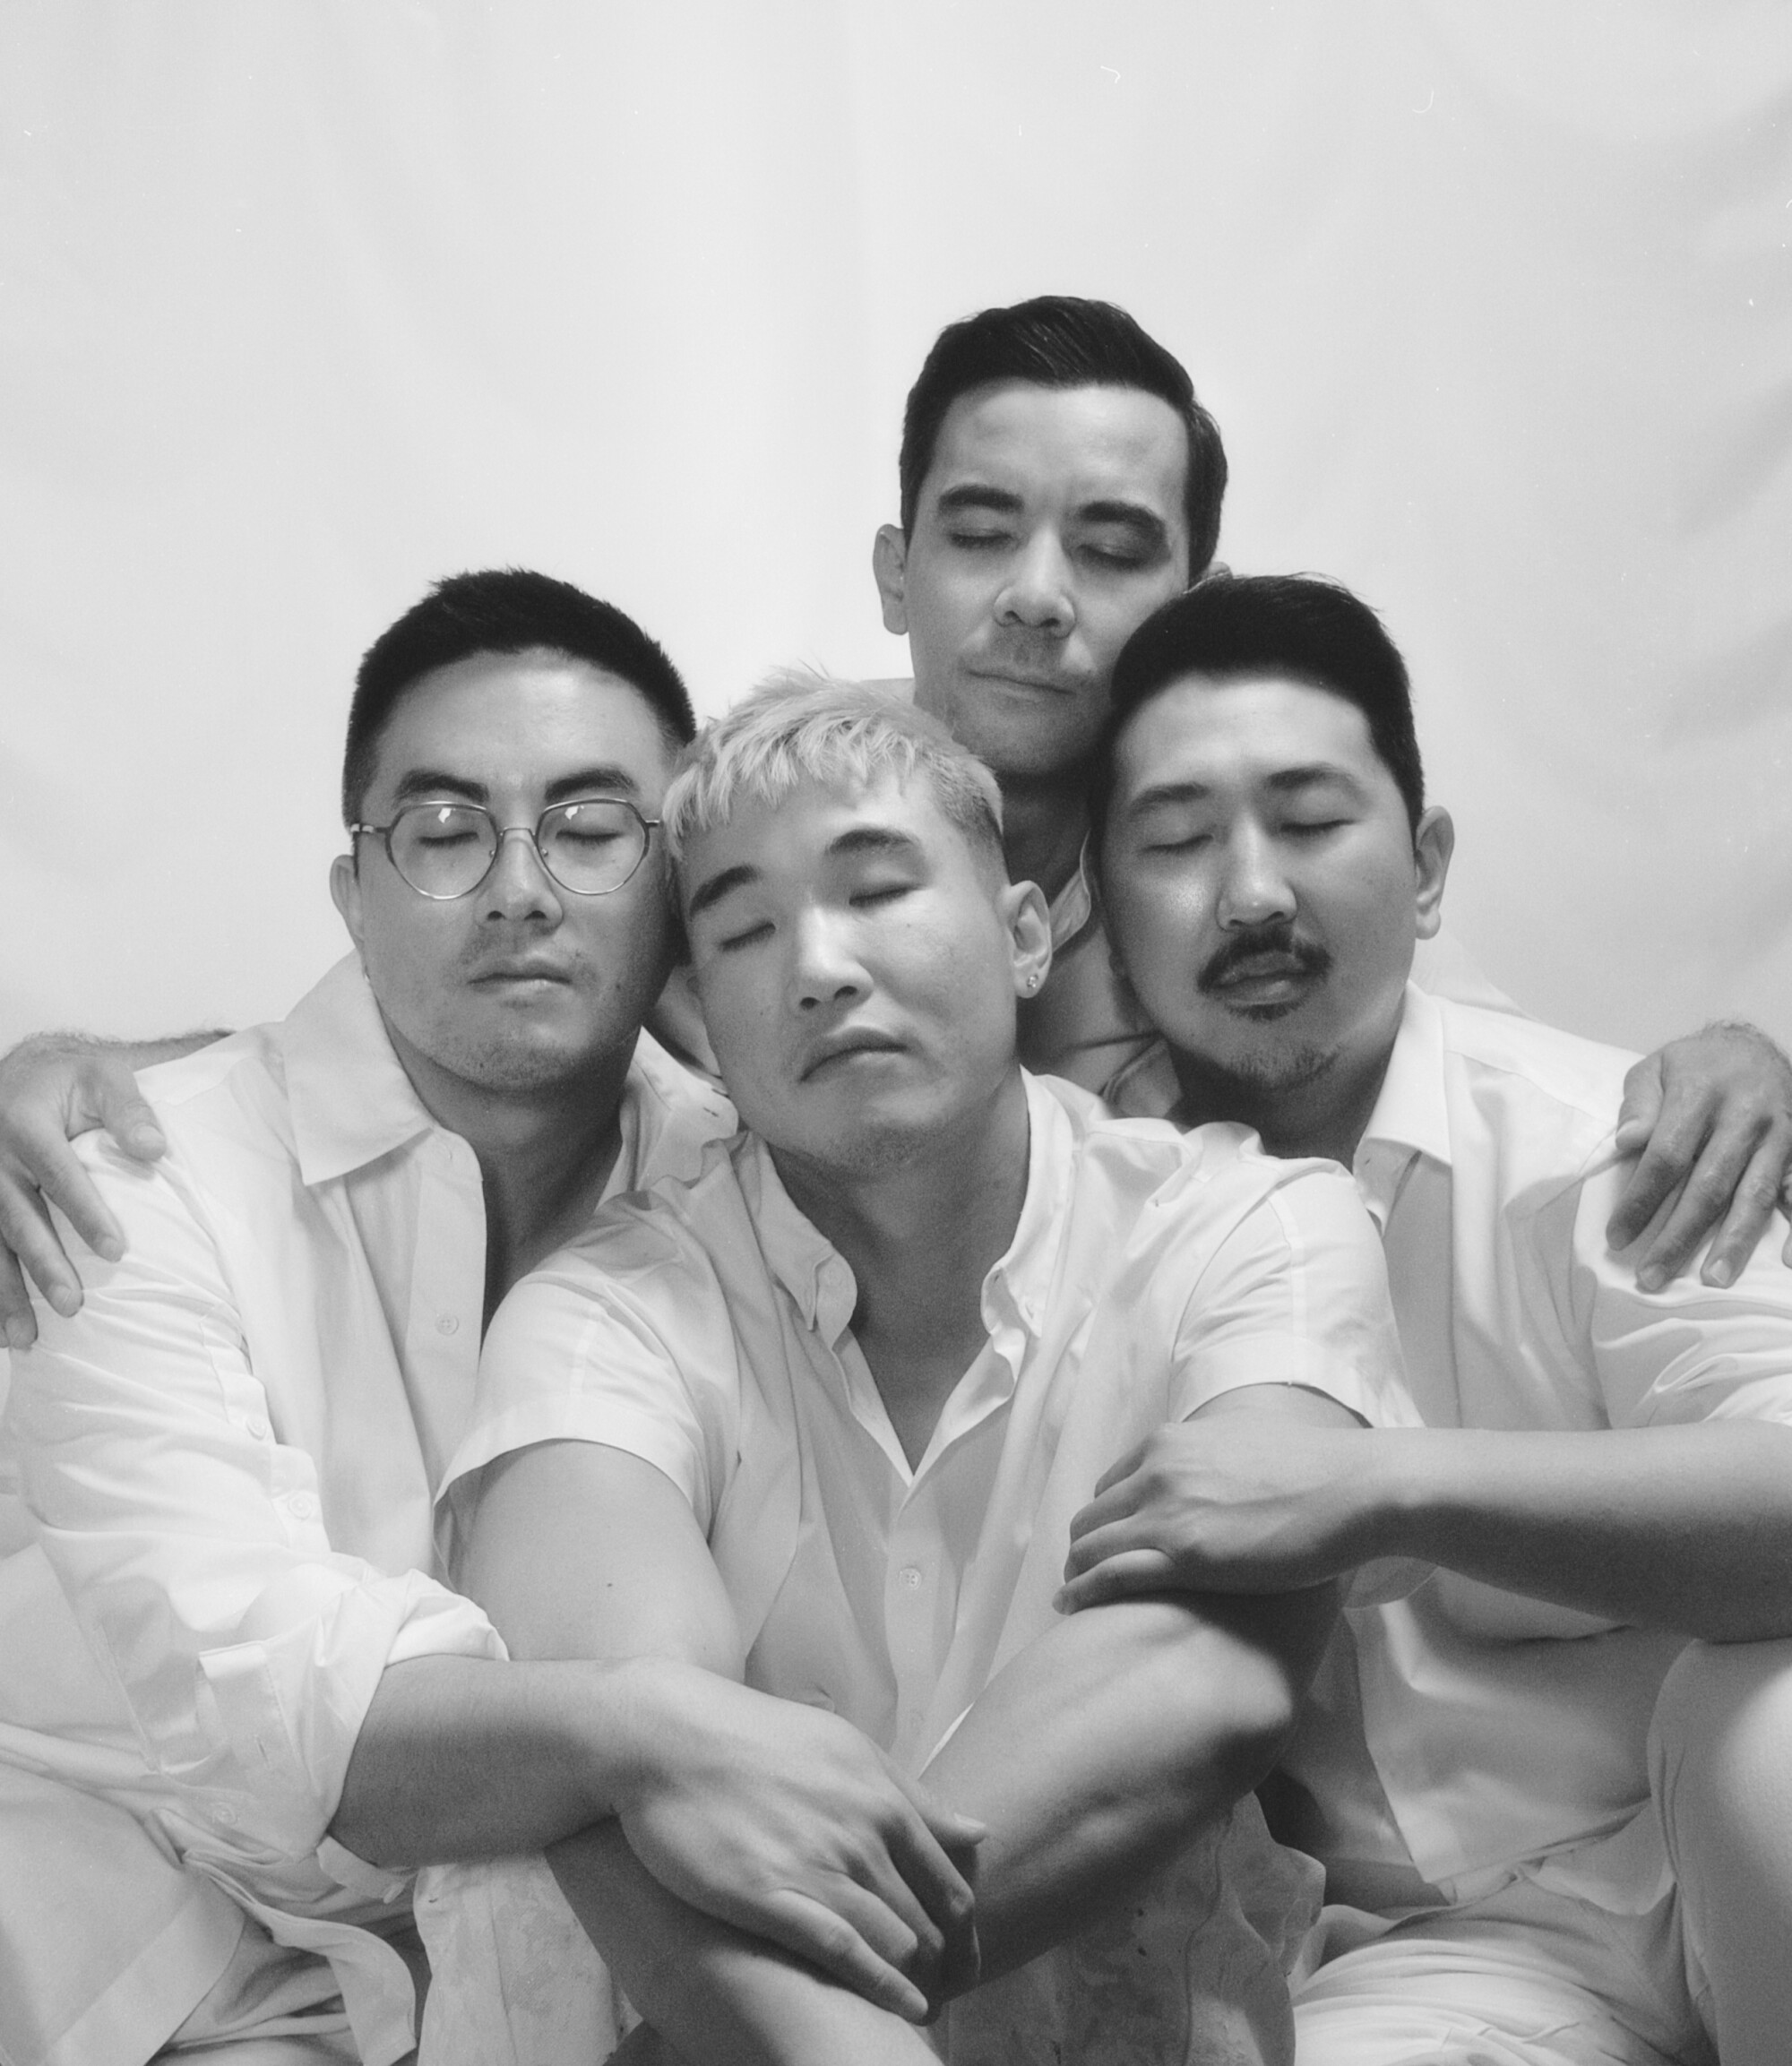 Four men in white embrace and close their eyes in a black and white photo